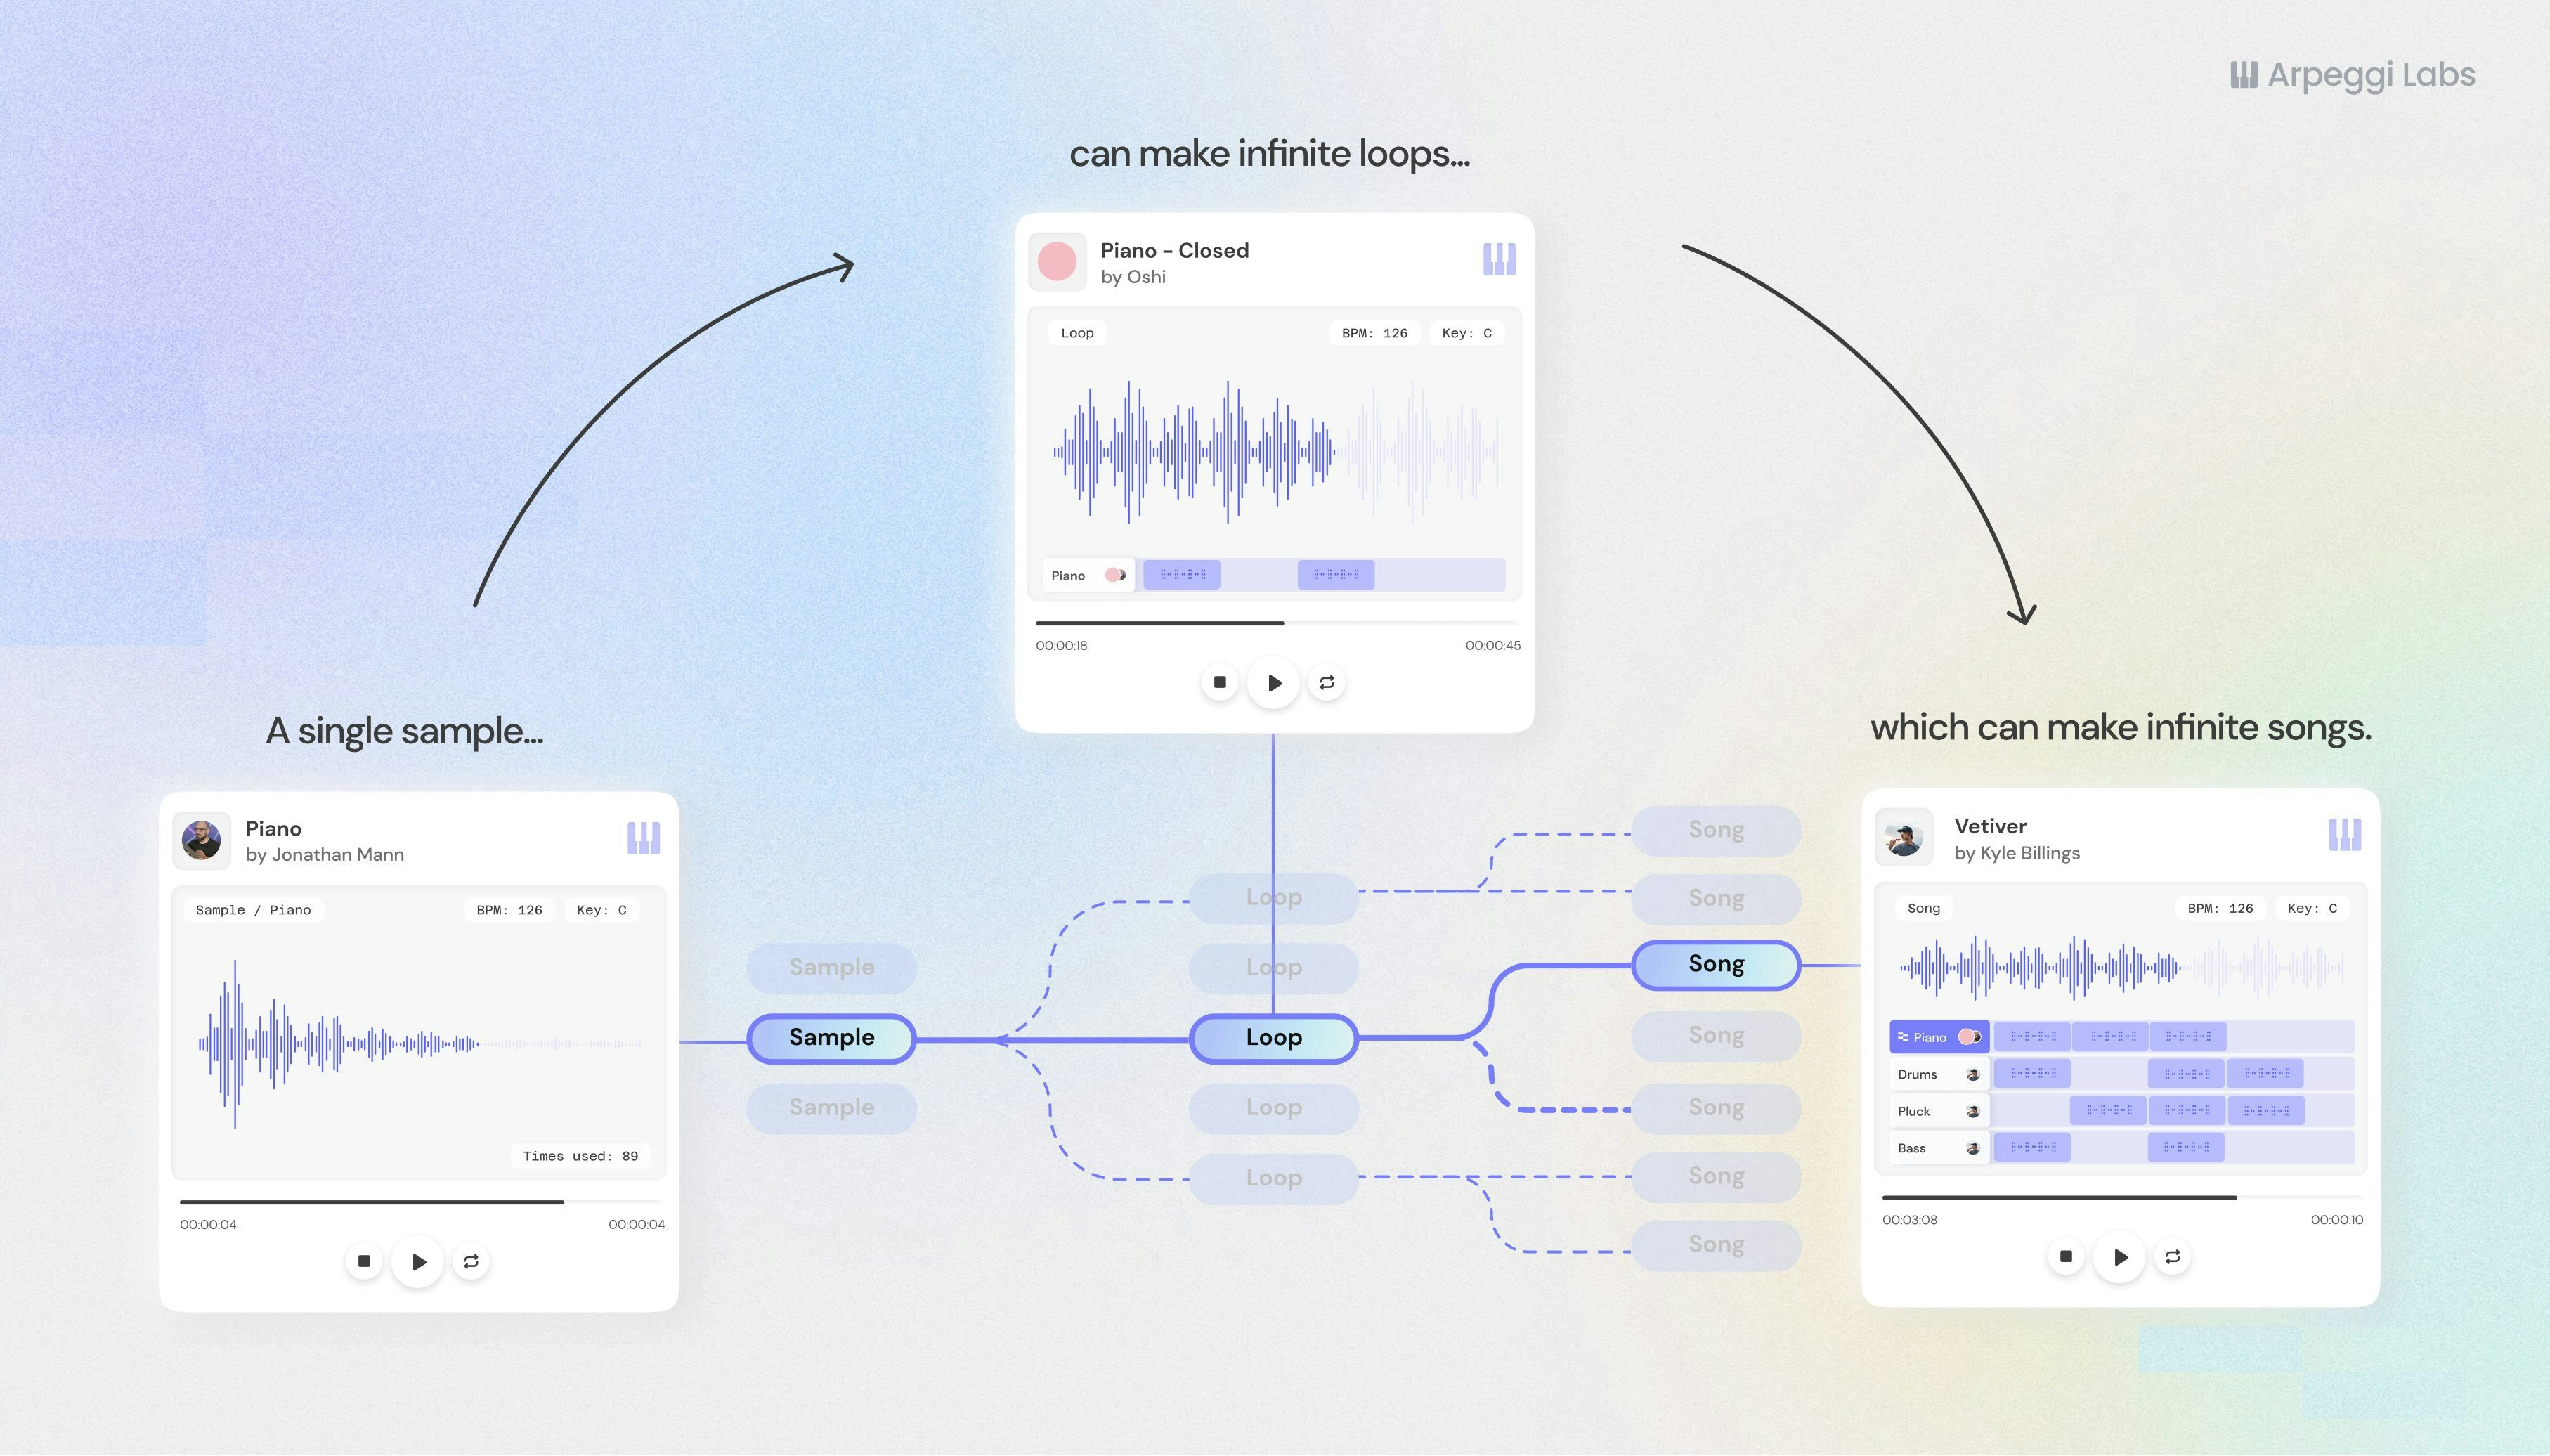 Arpeggi turns sounds into music building blocks and uses web3 technology to track when, where, and how sounds are used by other artists.